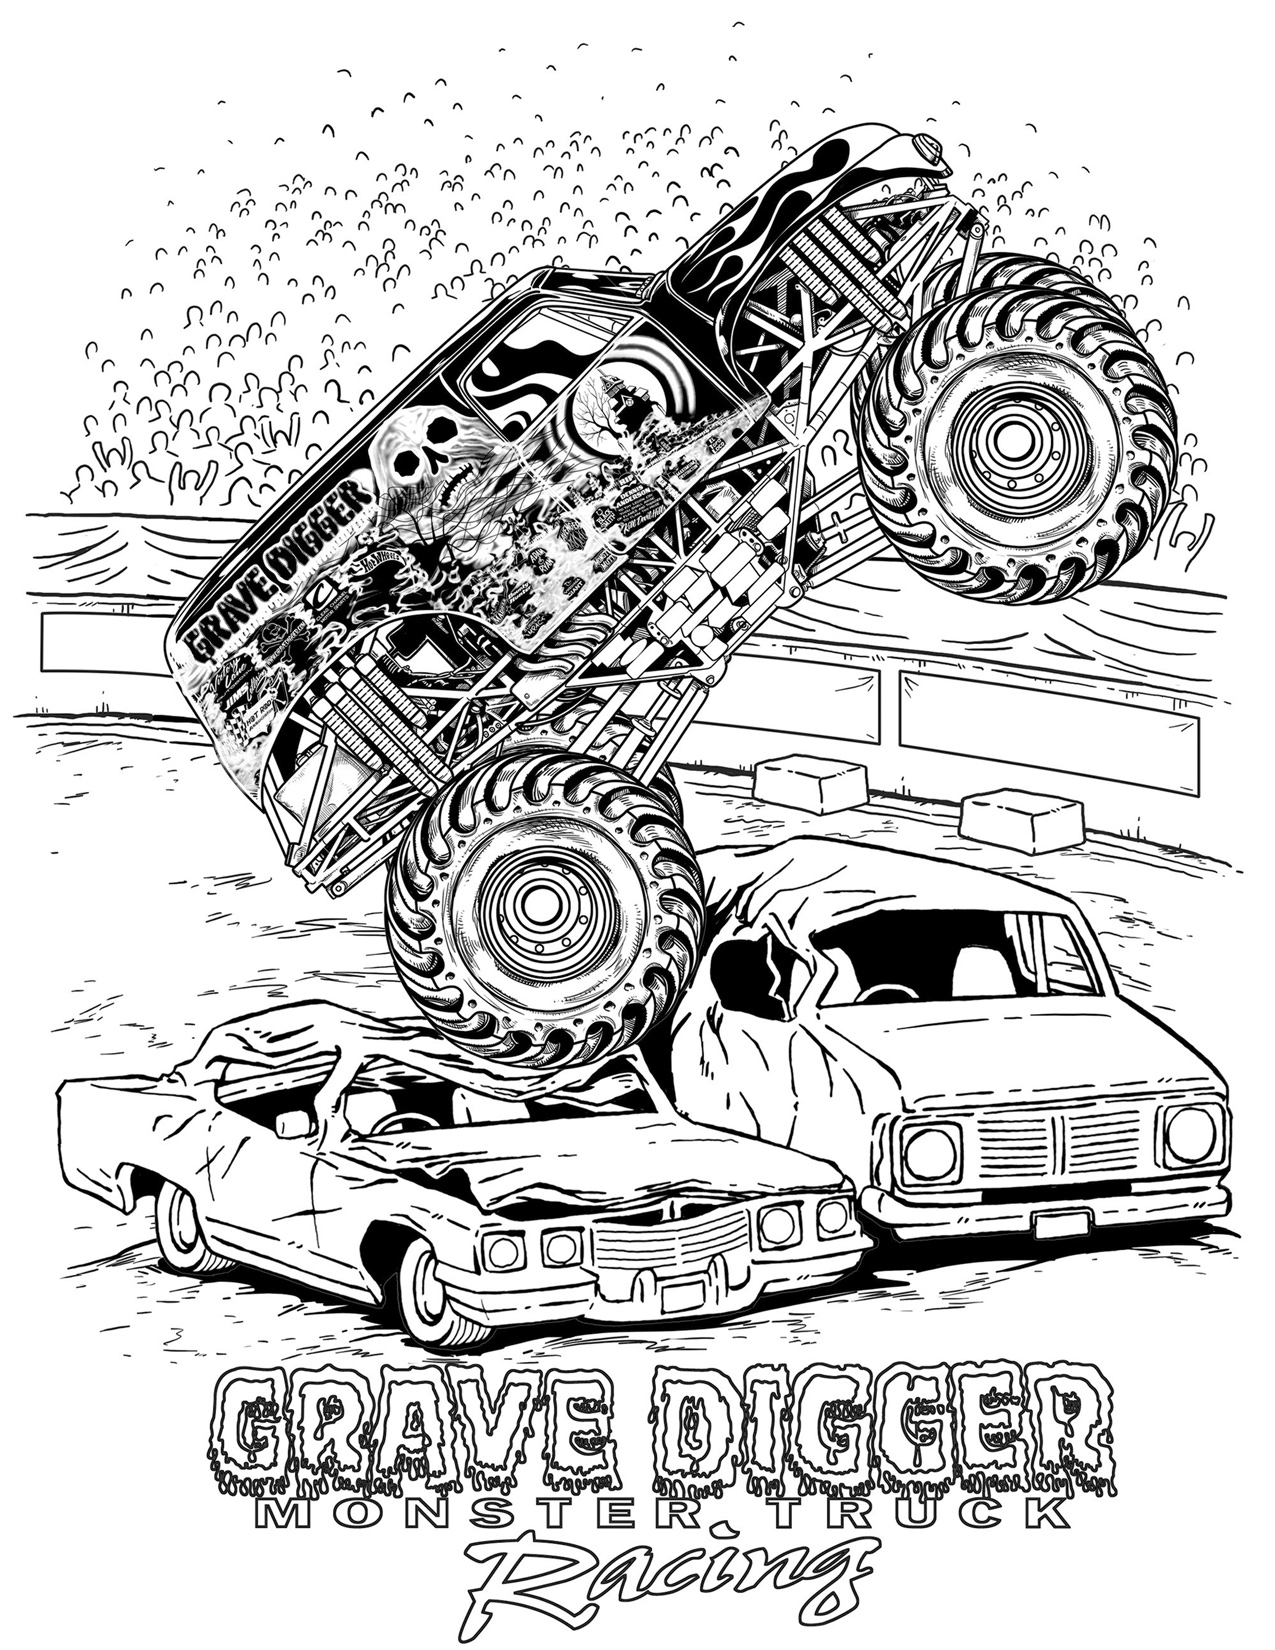  Monster Truck Coloring Pages, letscoloringpages.com, Grave Digger